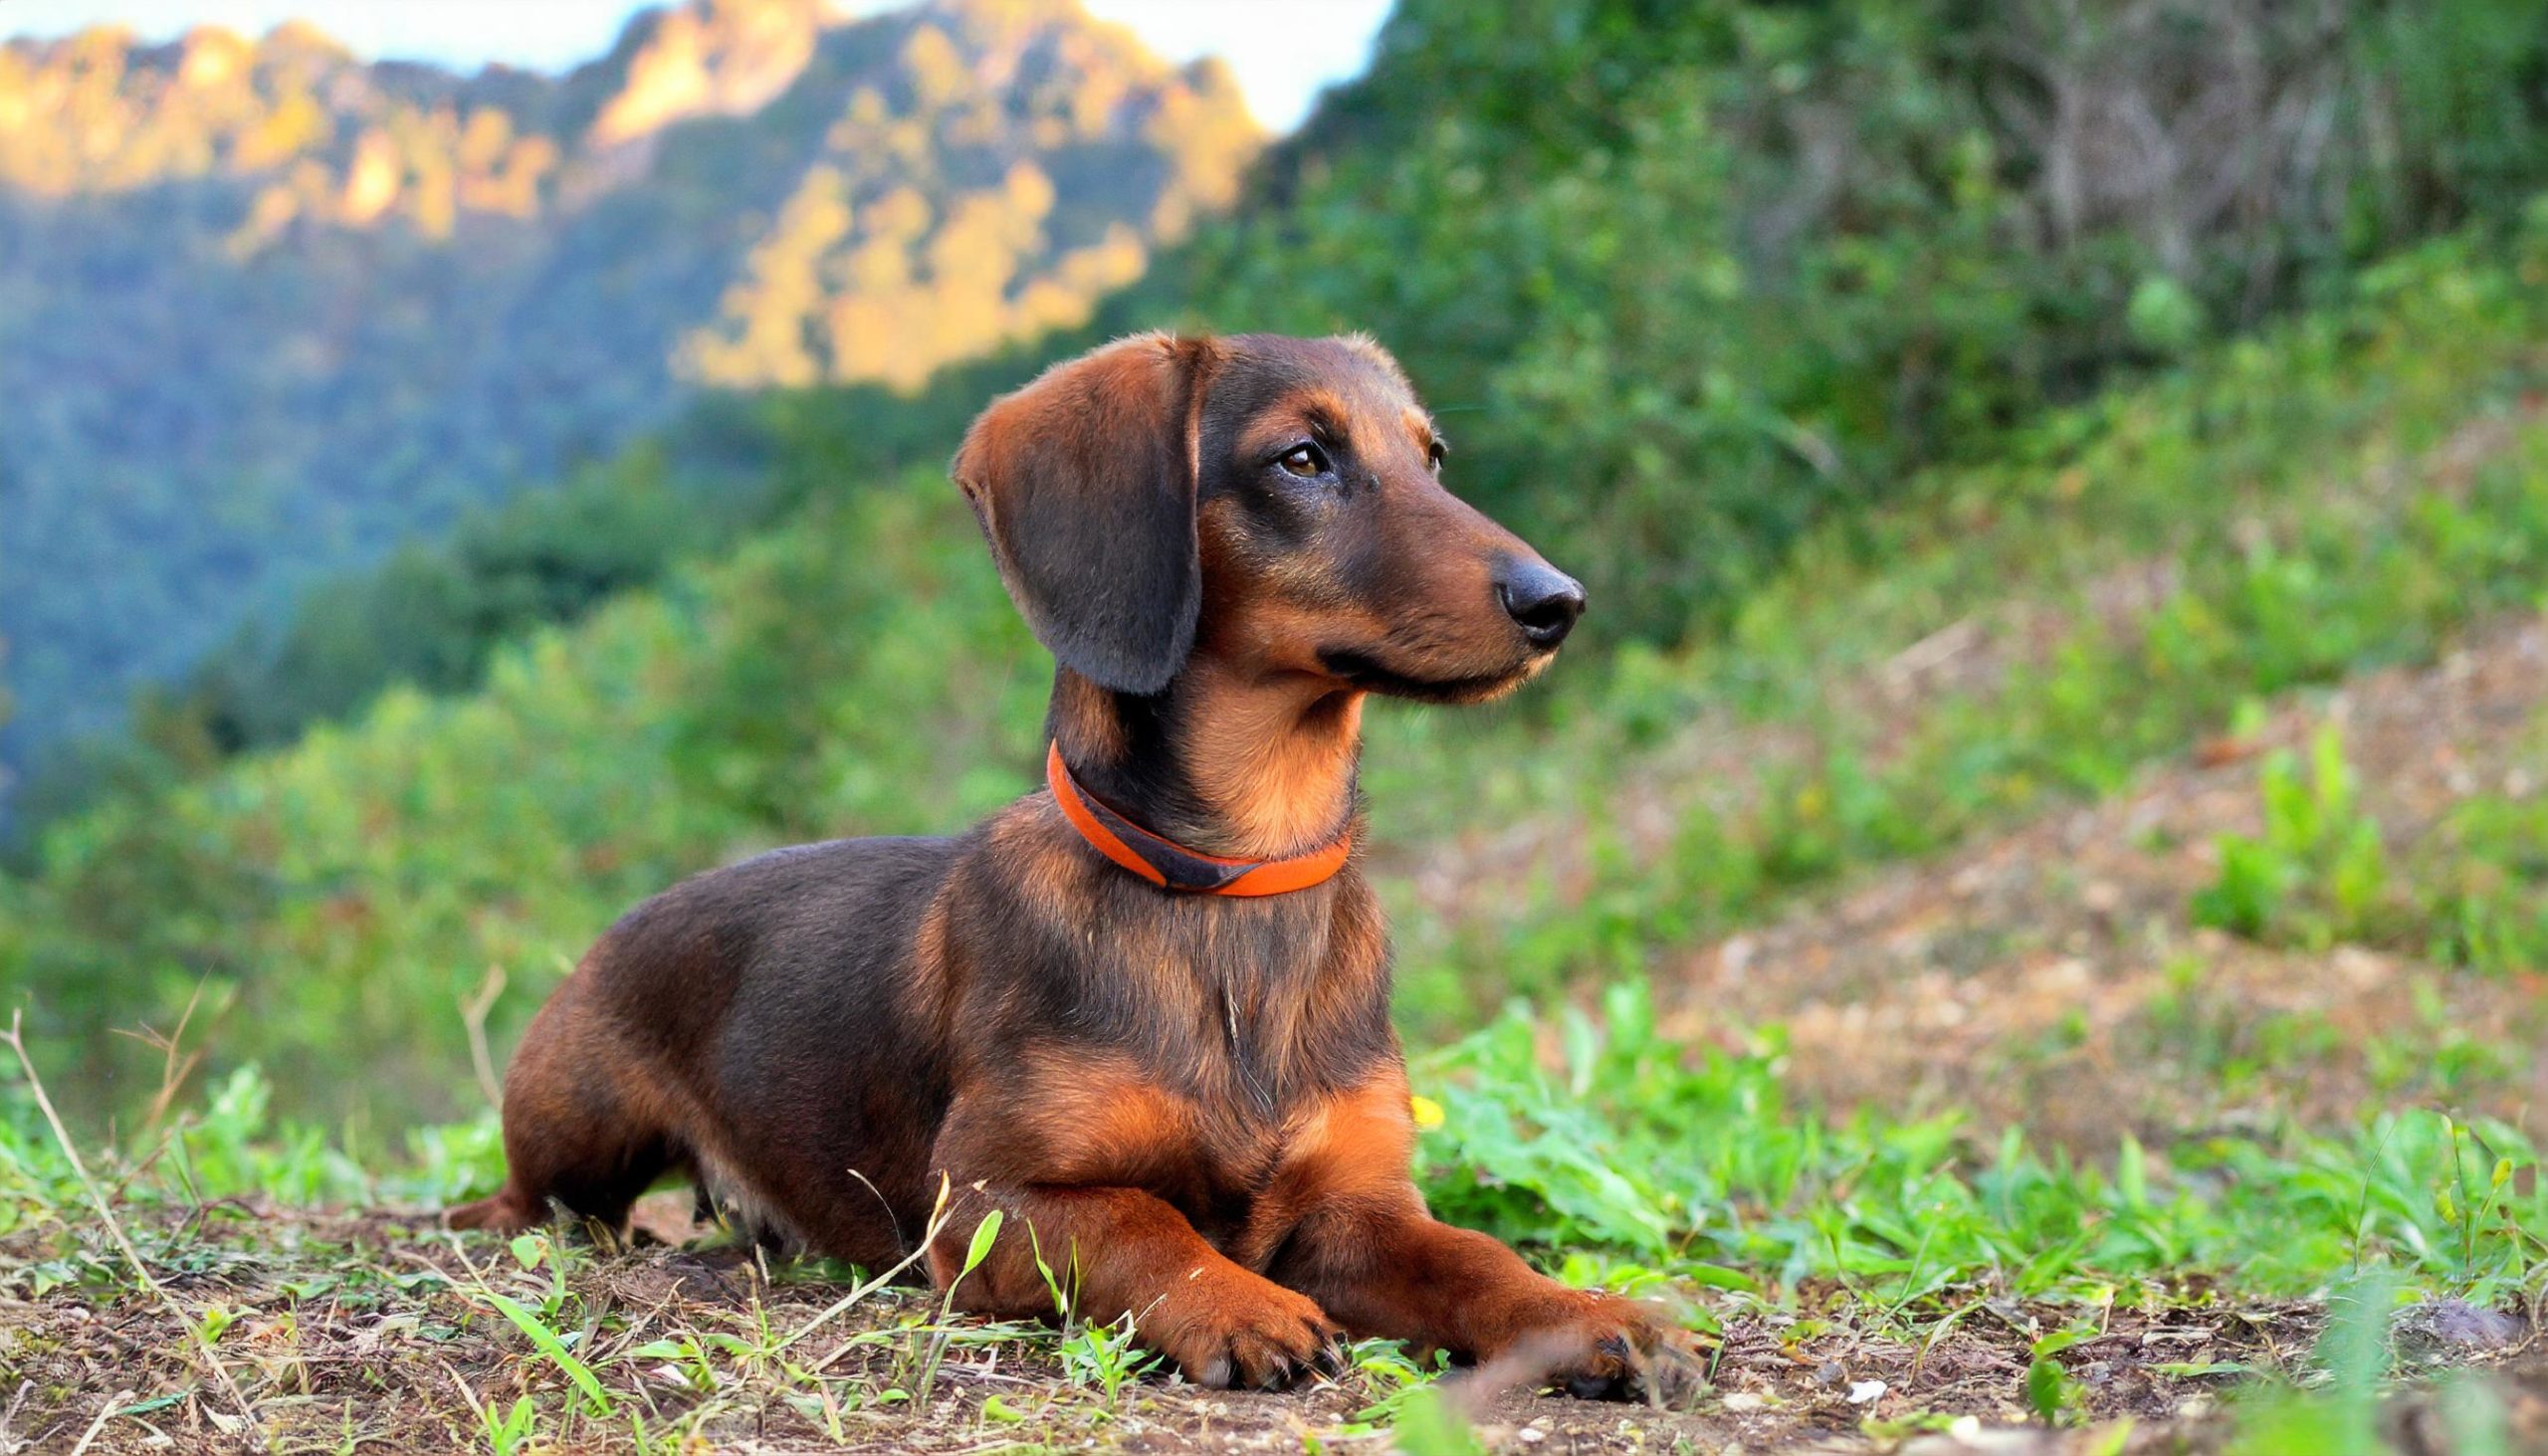 The Alpine Dachsbracke was bred to track wounded deer as well as boar, hare, and fox. It is highly efficient at following a trail even after it has gone cold